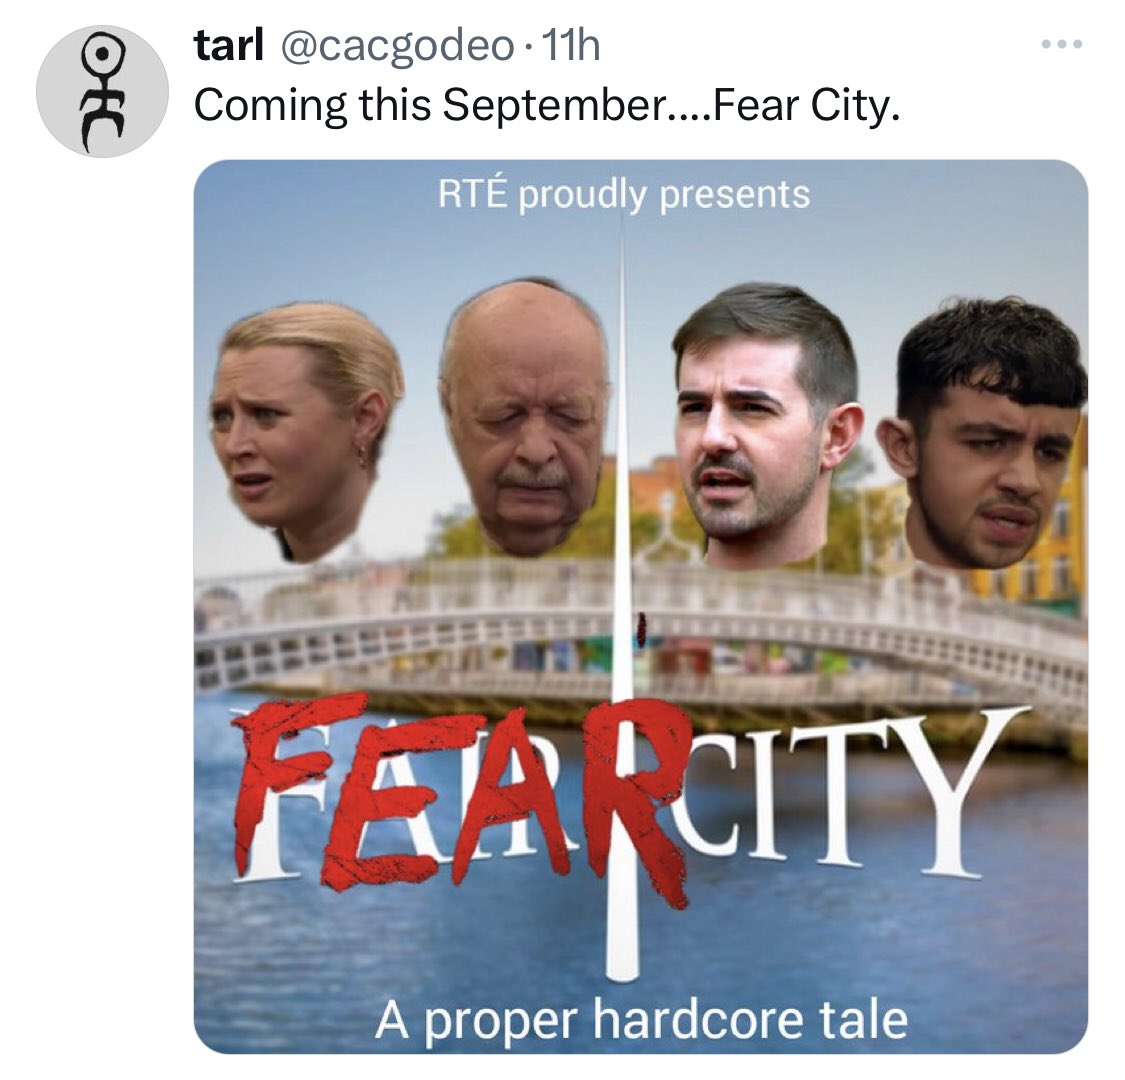 #FearCity = #FairCity

That’s exactly what the Liberal Lefty’s In #Ireland want 2 Spread✅ 

Well #GODLY People Who I Mix With Don’t #FEAR Any1 Or Anything 😉

We Know This Is A Cheap Tactic 2 Keep The Masses In Fear Of People Who Share Conservative Values 

DONT PUSH US⚠️